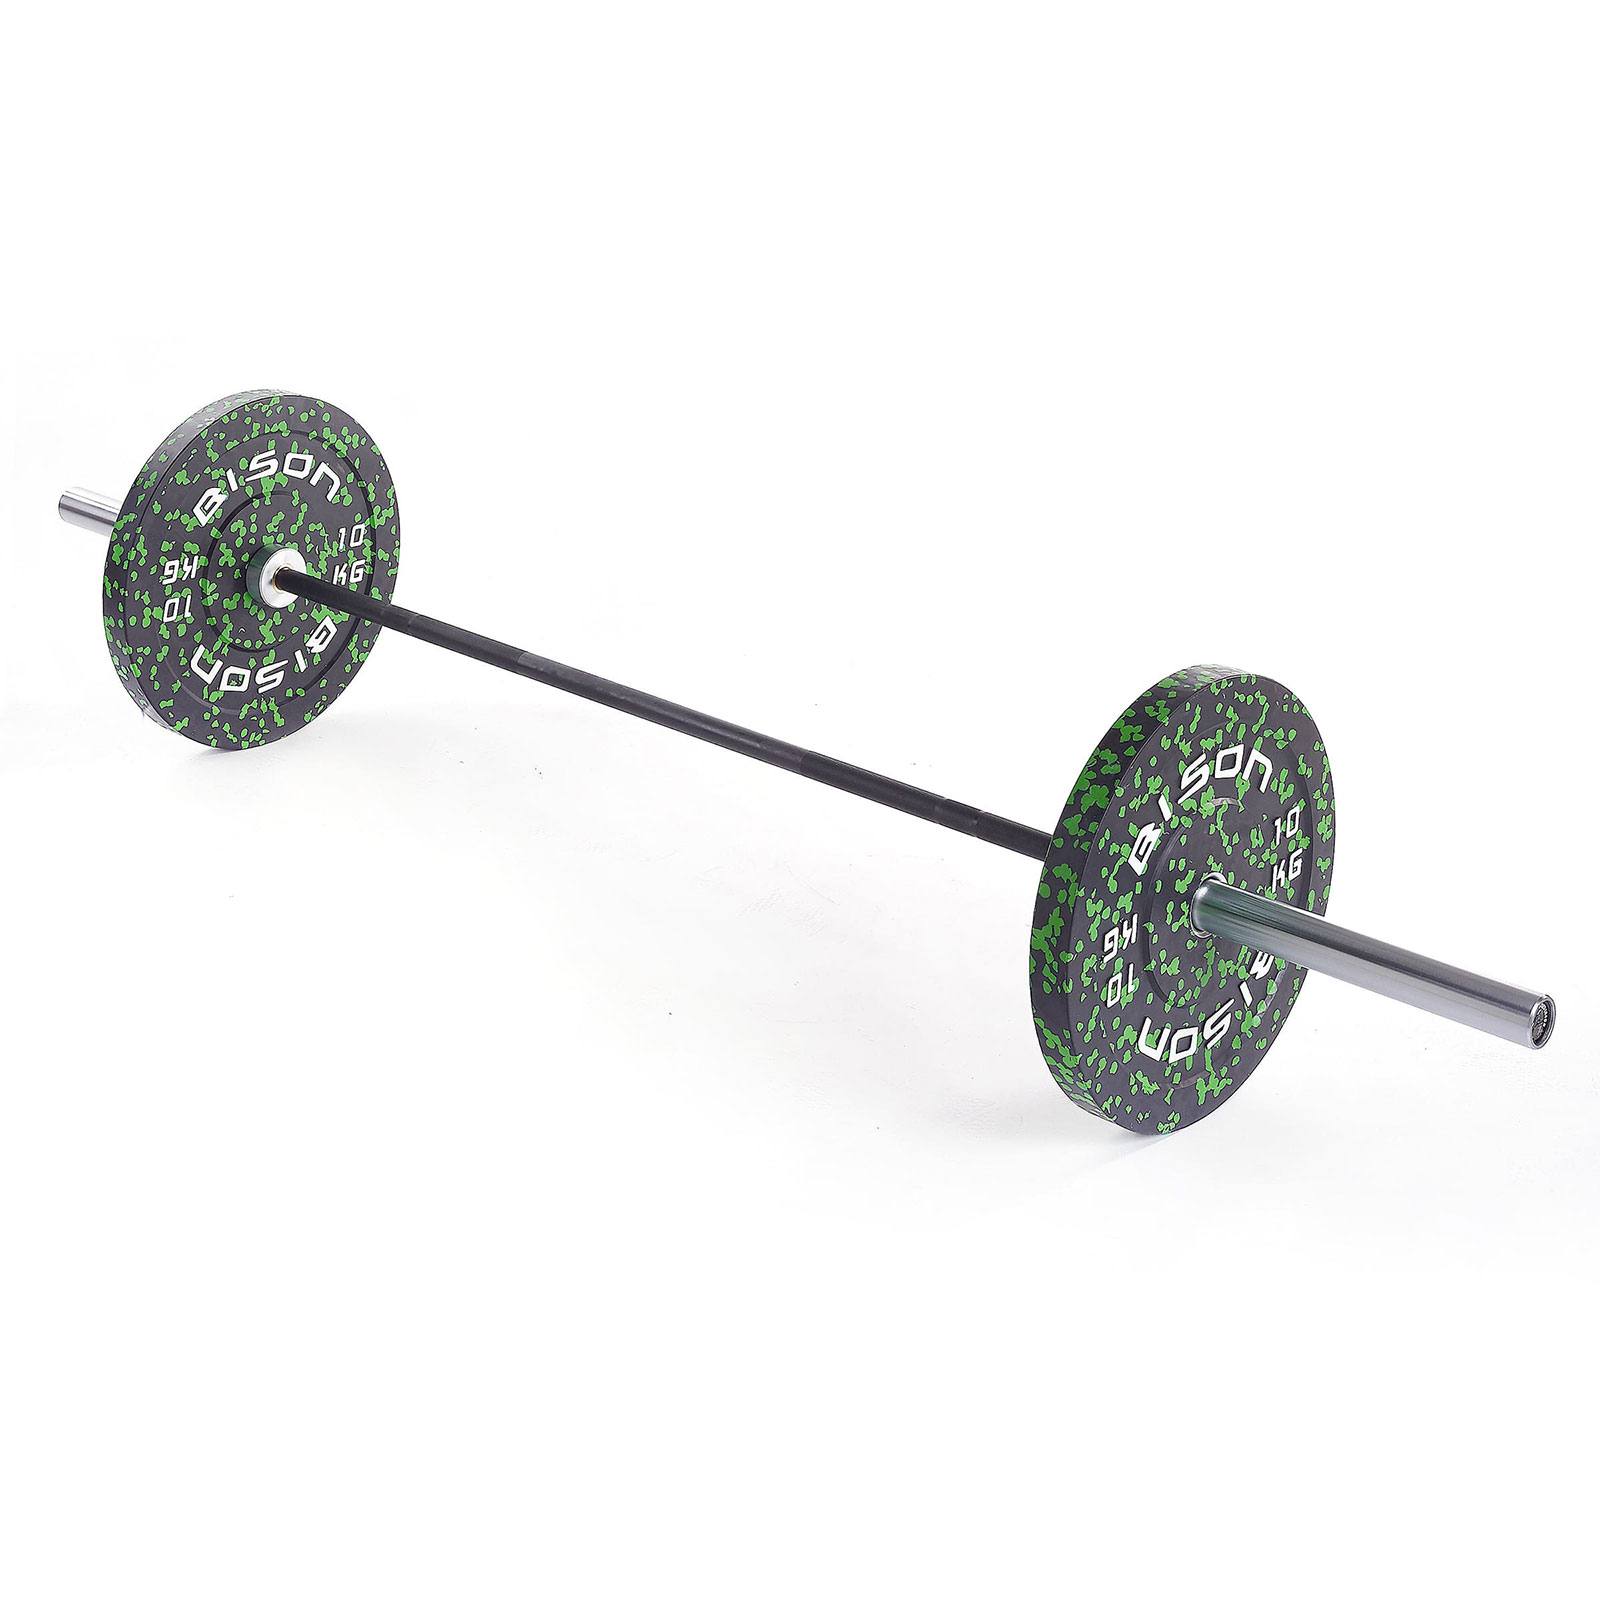 The Wolverson Olympic Bar - 20kg